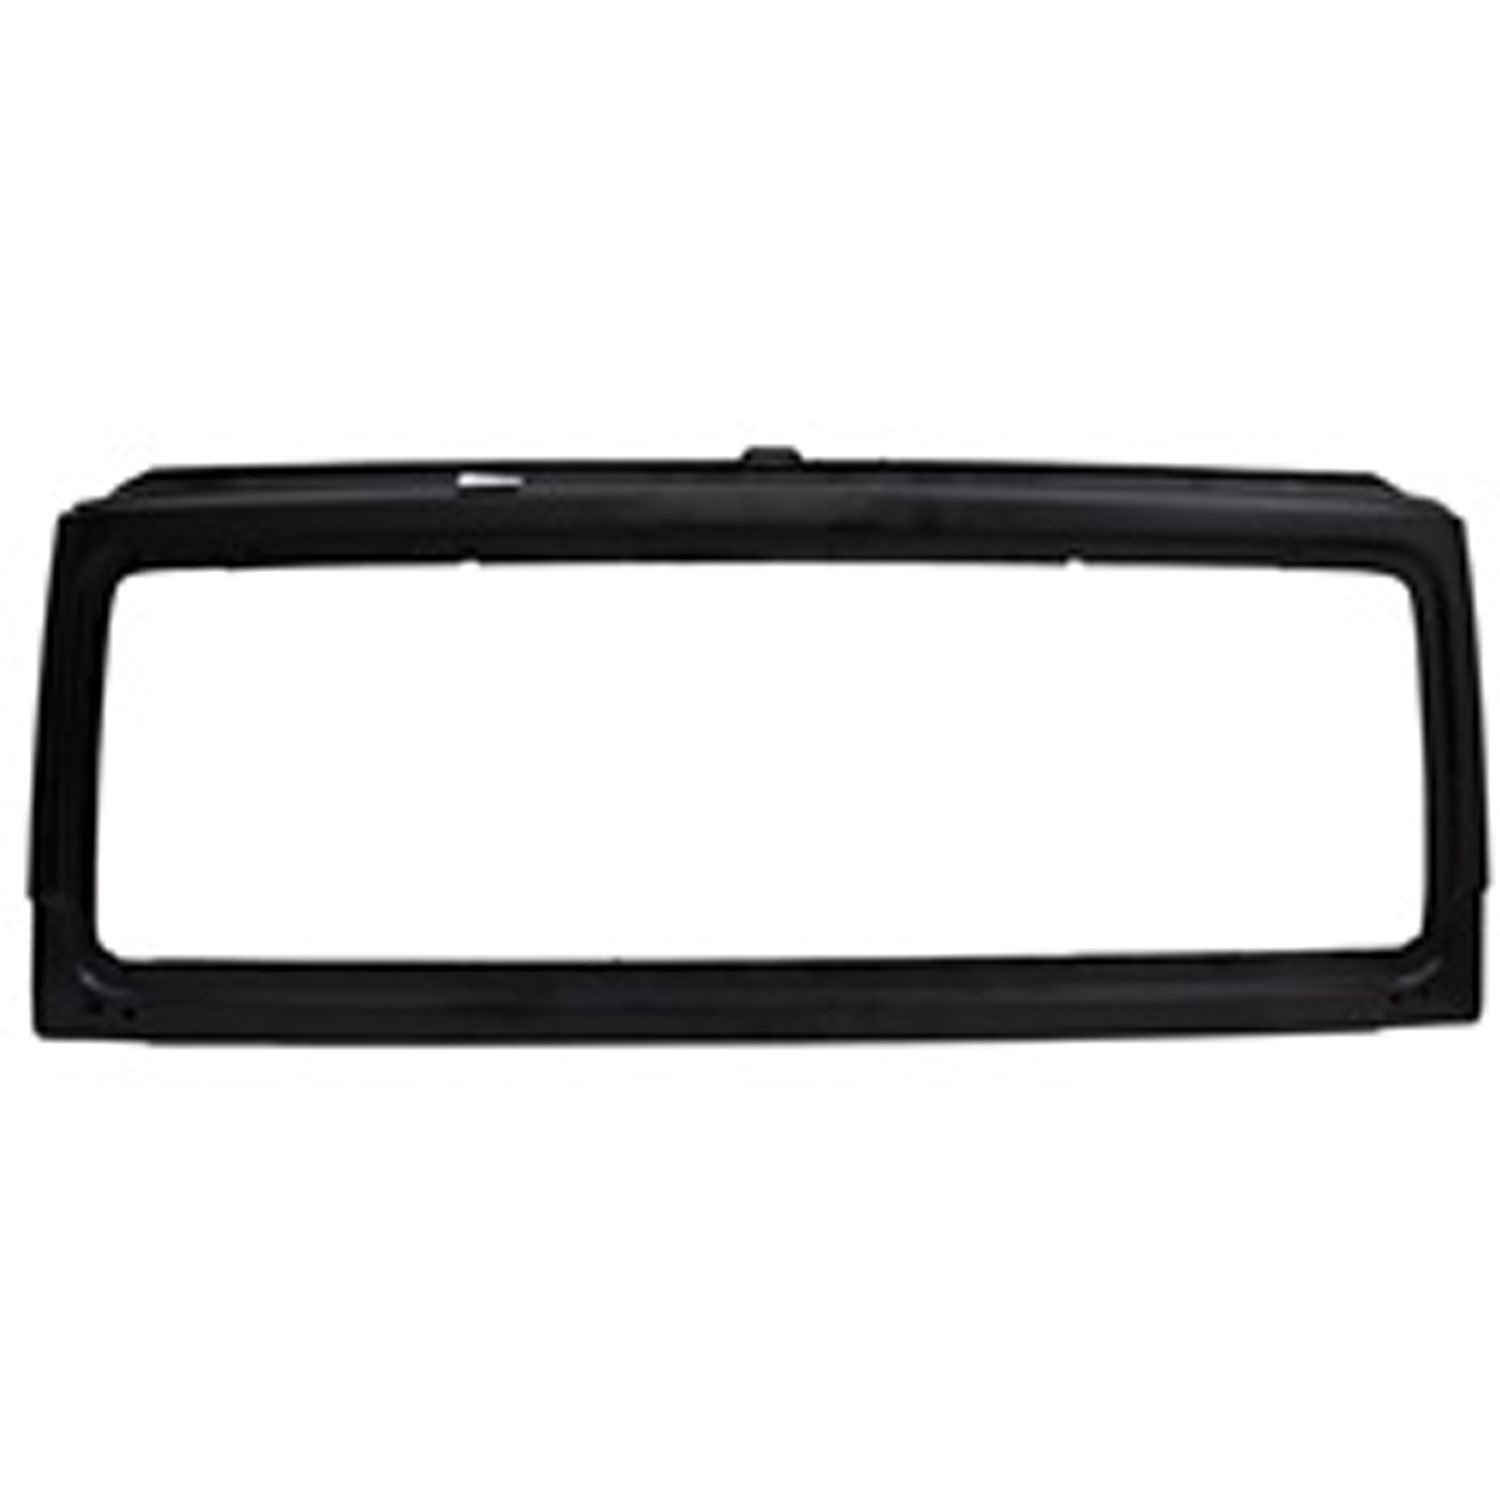 Replacement windshield frame from Omix-ADA, Fits 03-06 Jeep Wrangler TJ and 04-06 LJ Wrangler Unlimited.